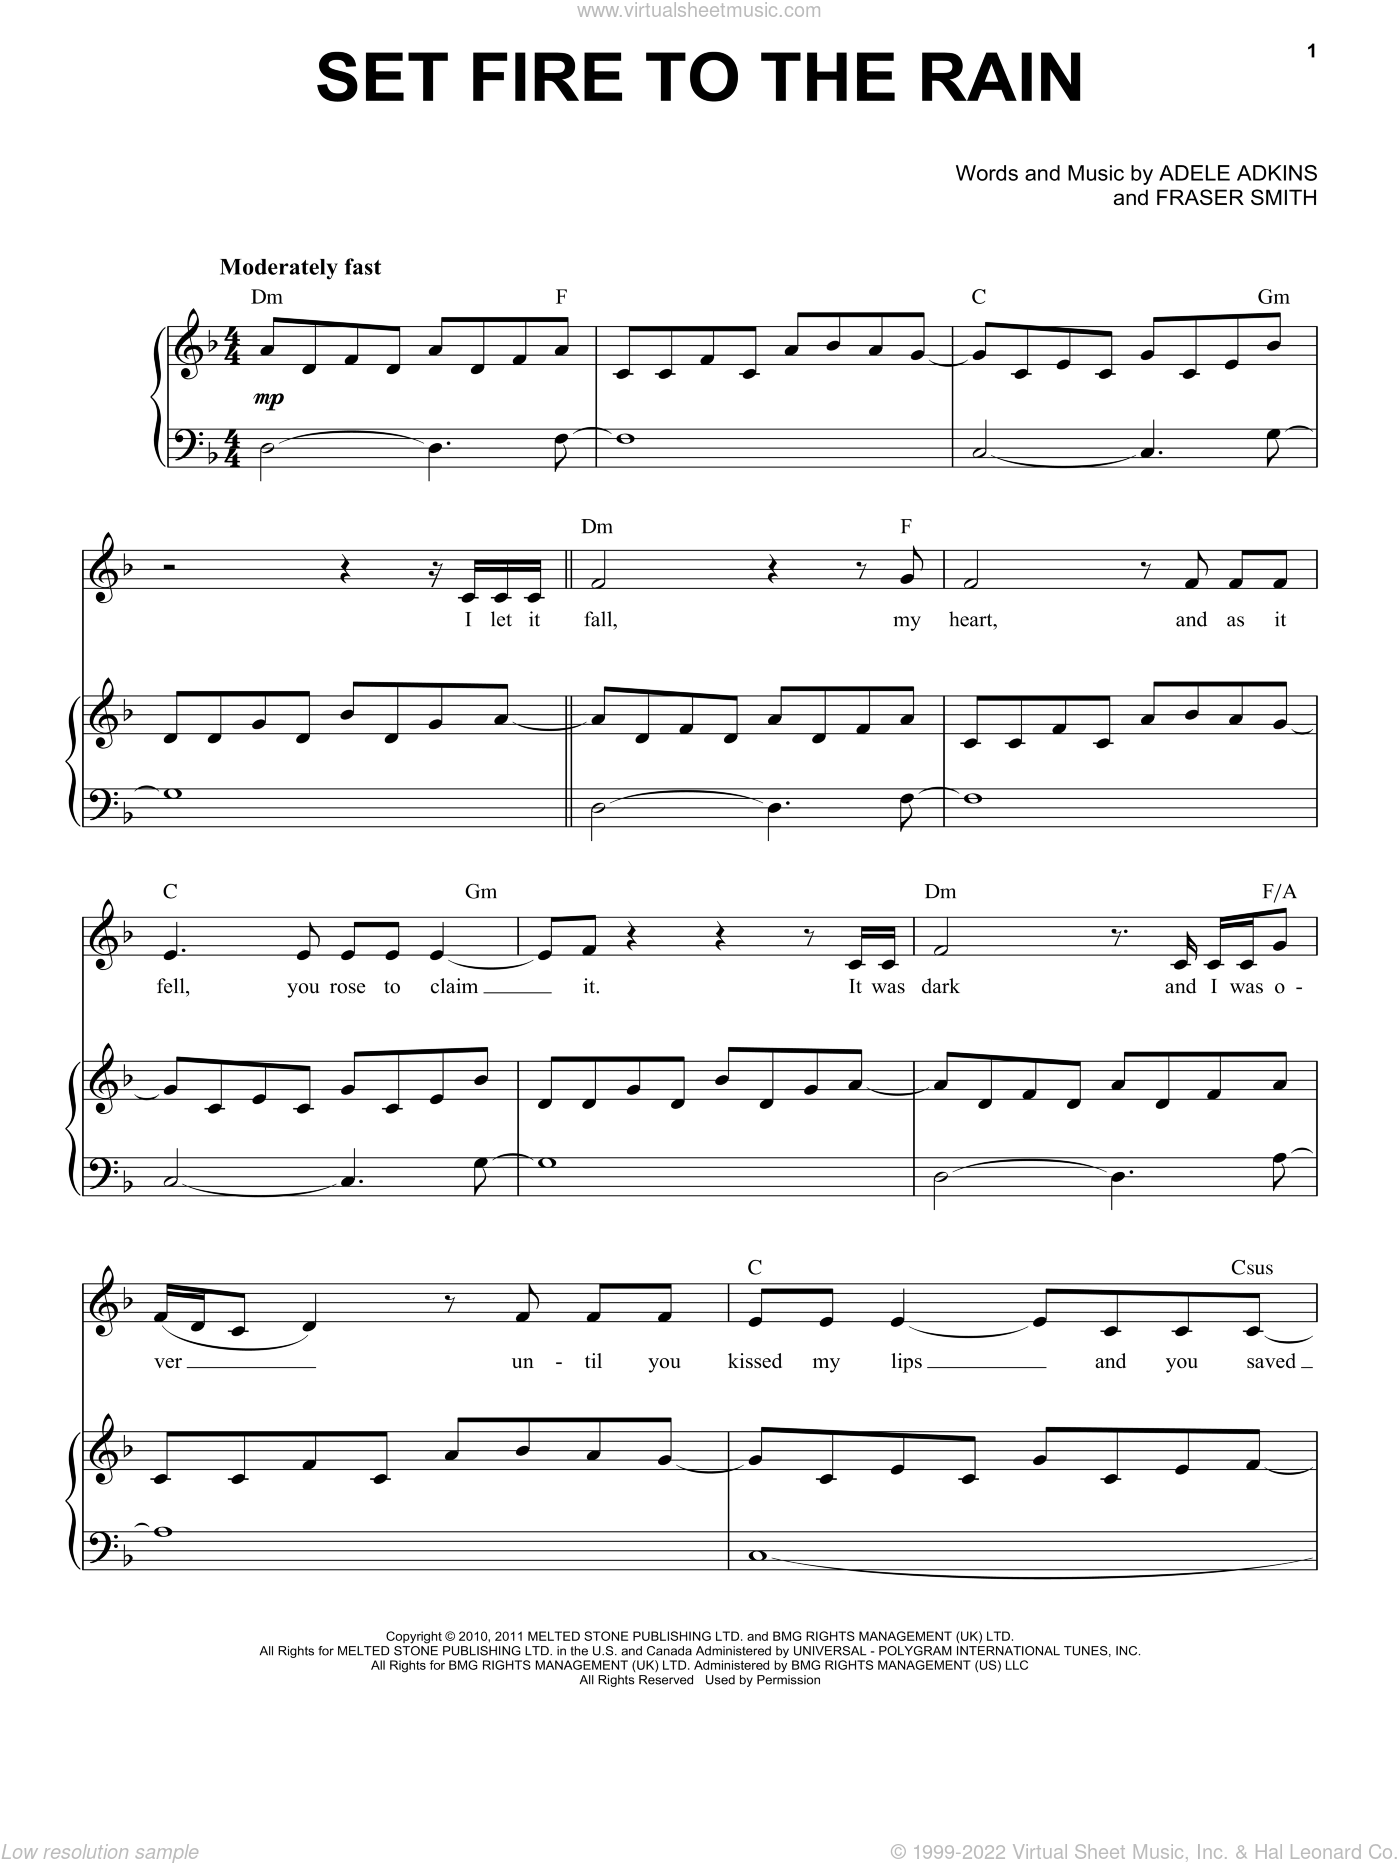 Adele - Set Fire To The Rain sheet music for voice and piano